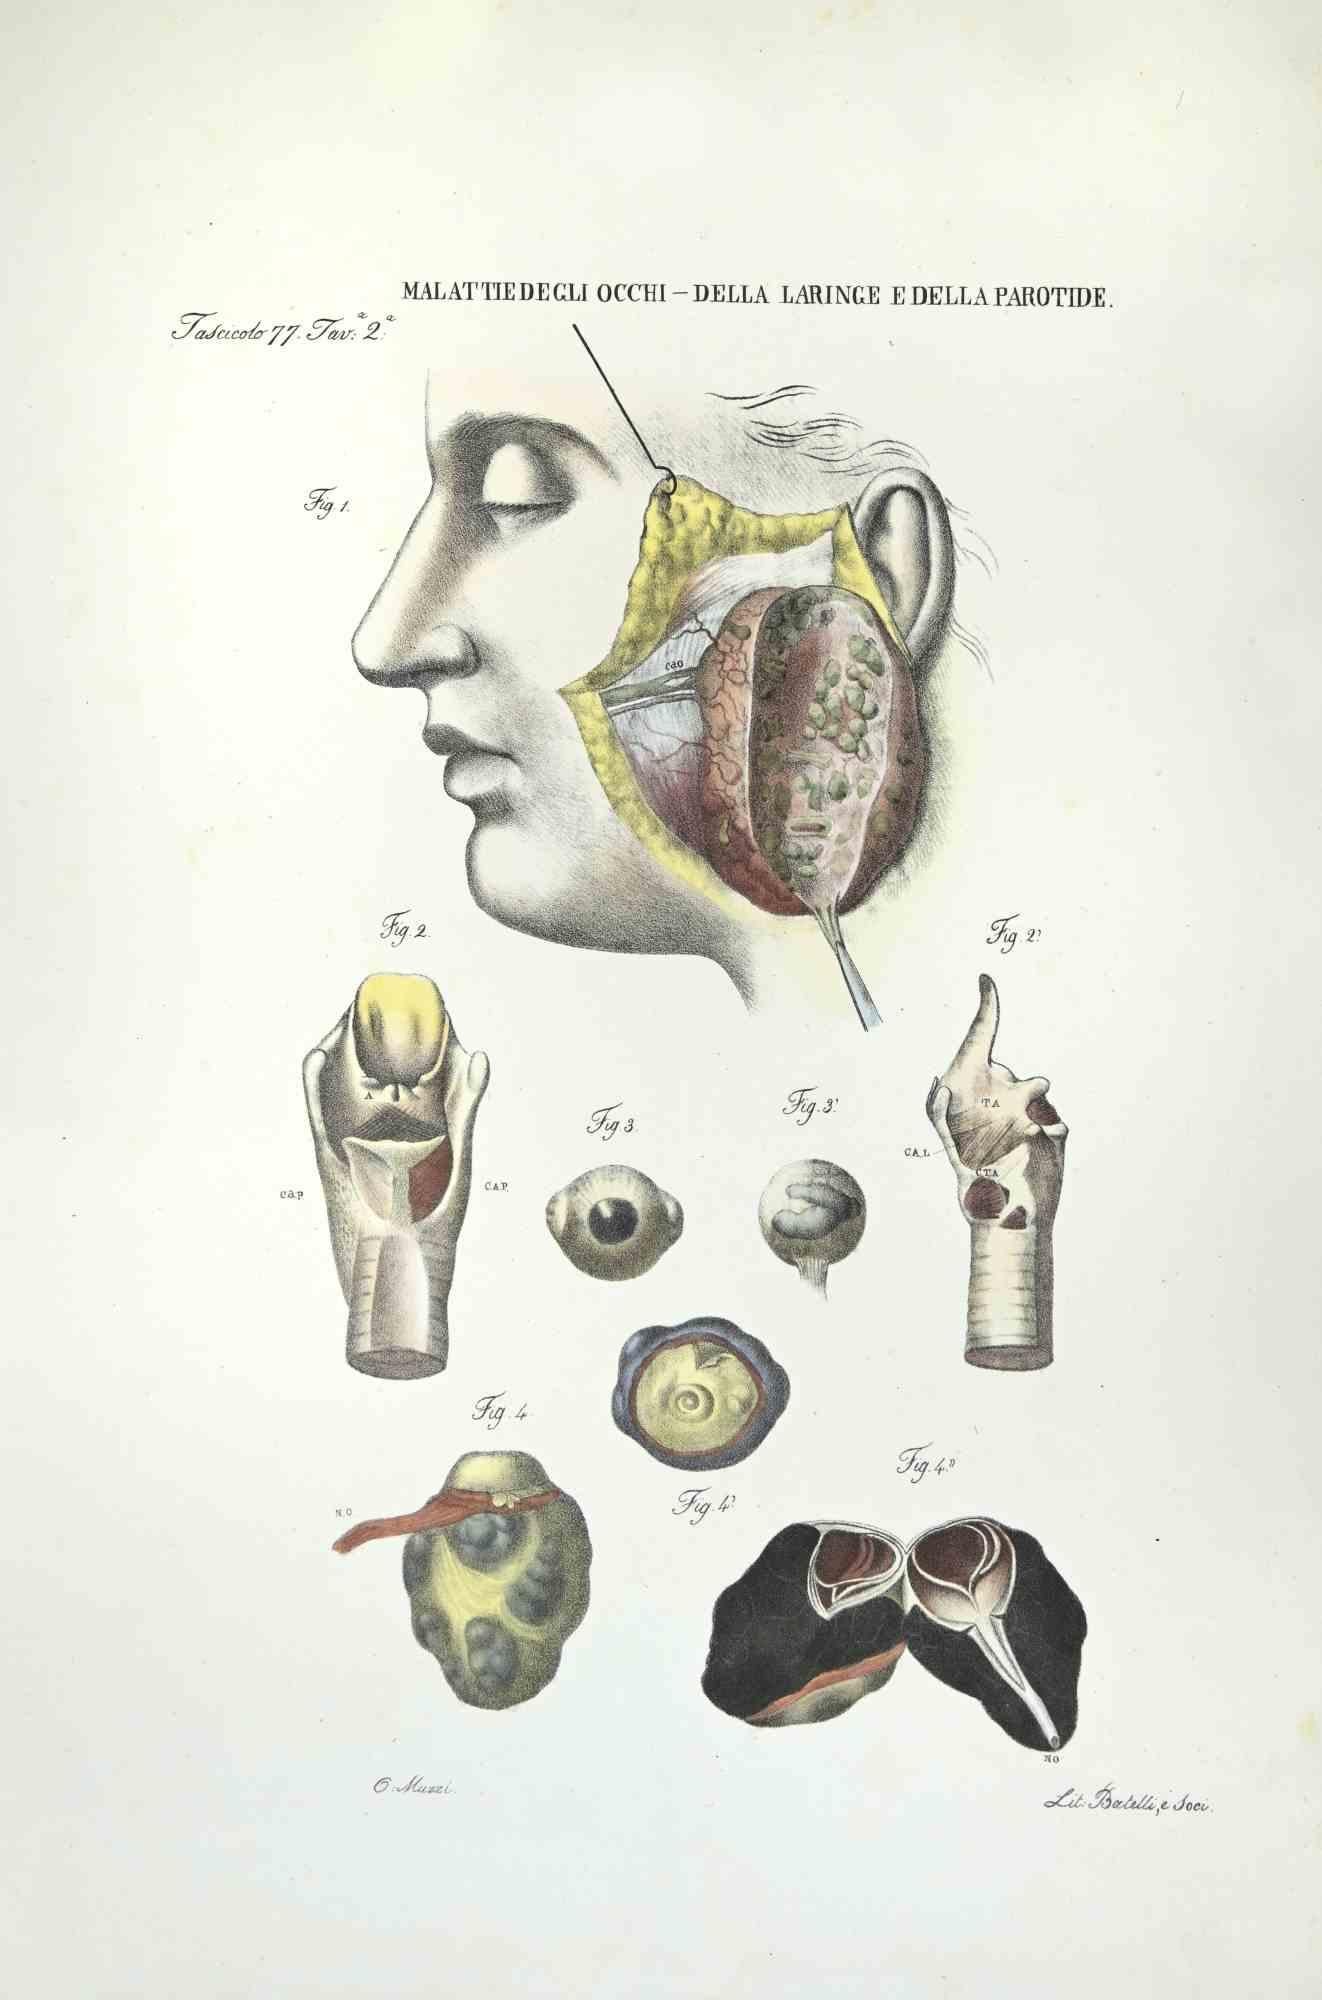 Diseases of the Eyes - Larynx and Parotis is a lithograph hand colored by Ottavio Muzzi for the edition of Antoine Chazal,Human Anatomy, Printers Batelli and Ridolfi, realized in 1843.

Signed on plate on the lower left margin.

The artwork belongs